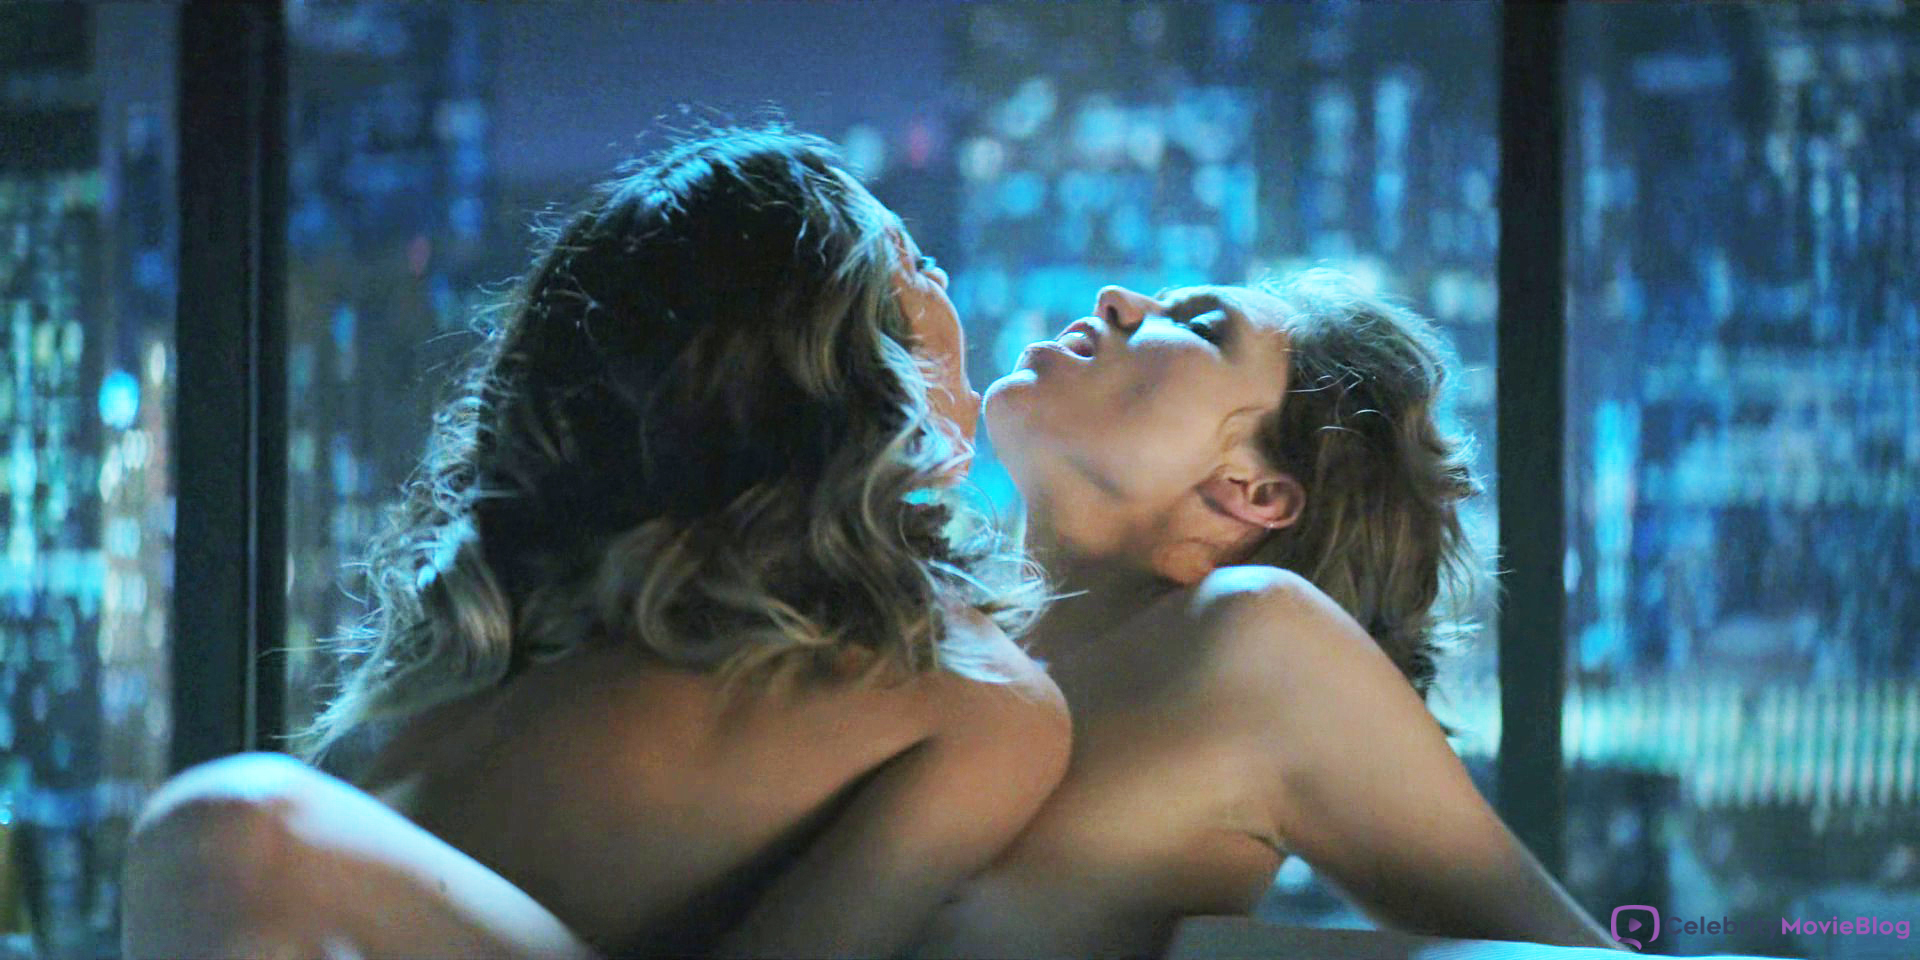 1920px x 960px - Lili Simmons Nude Lesbian Sex in Power Book IV Force - Celebrity Movie Blog